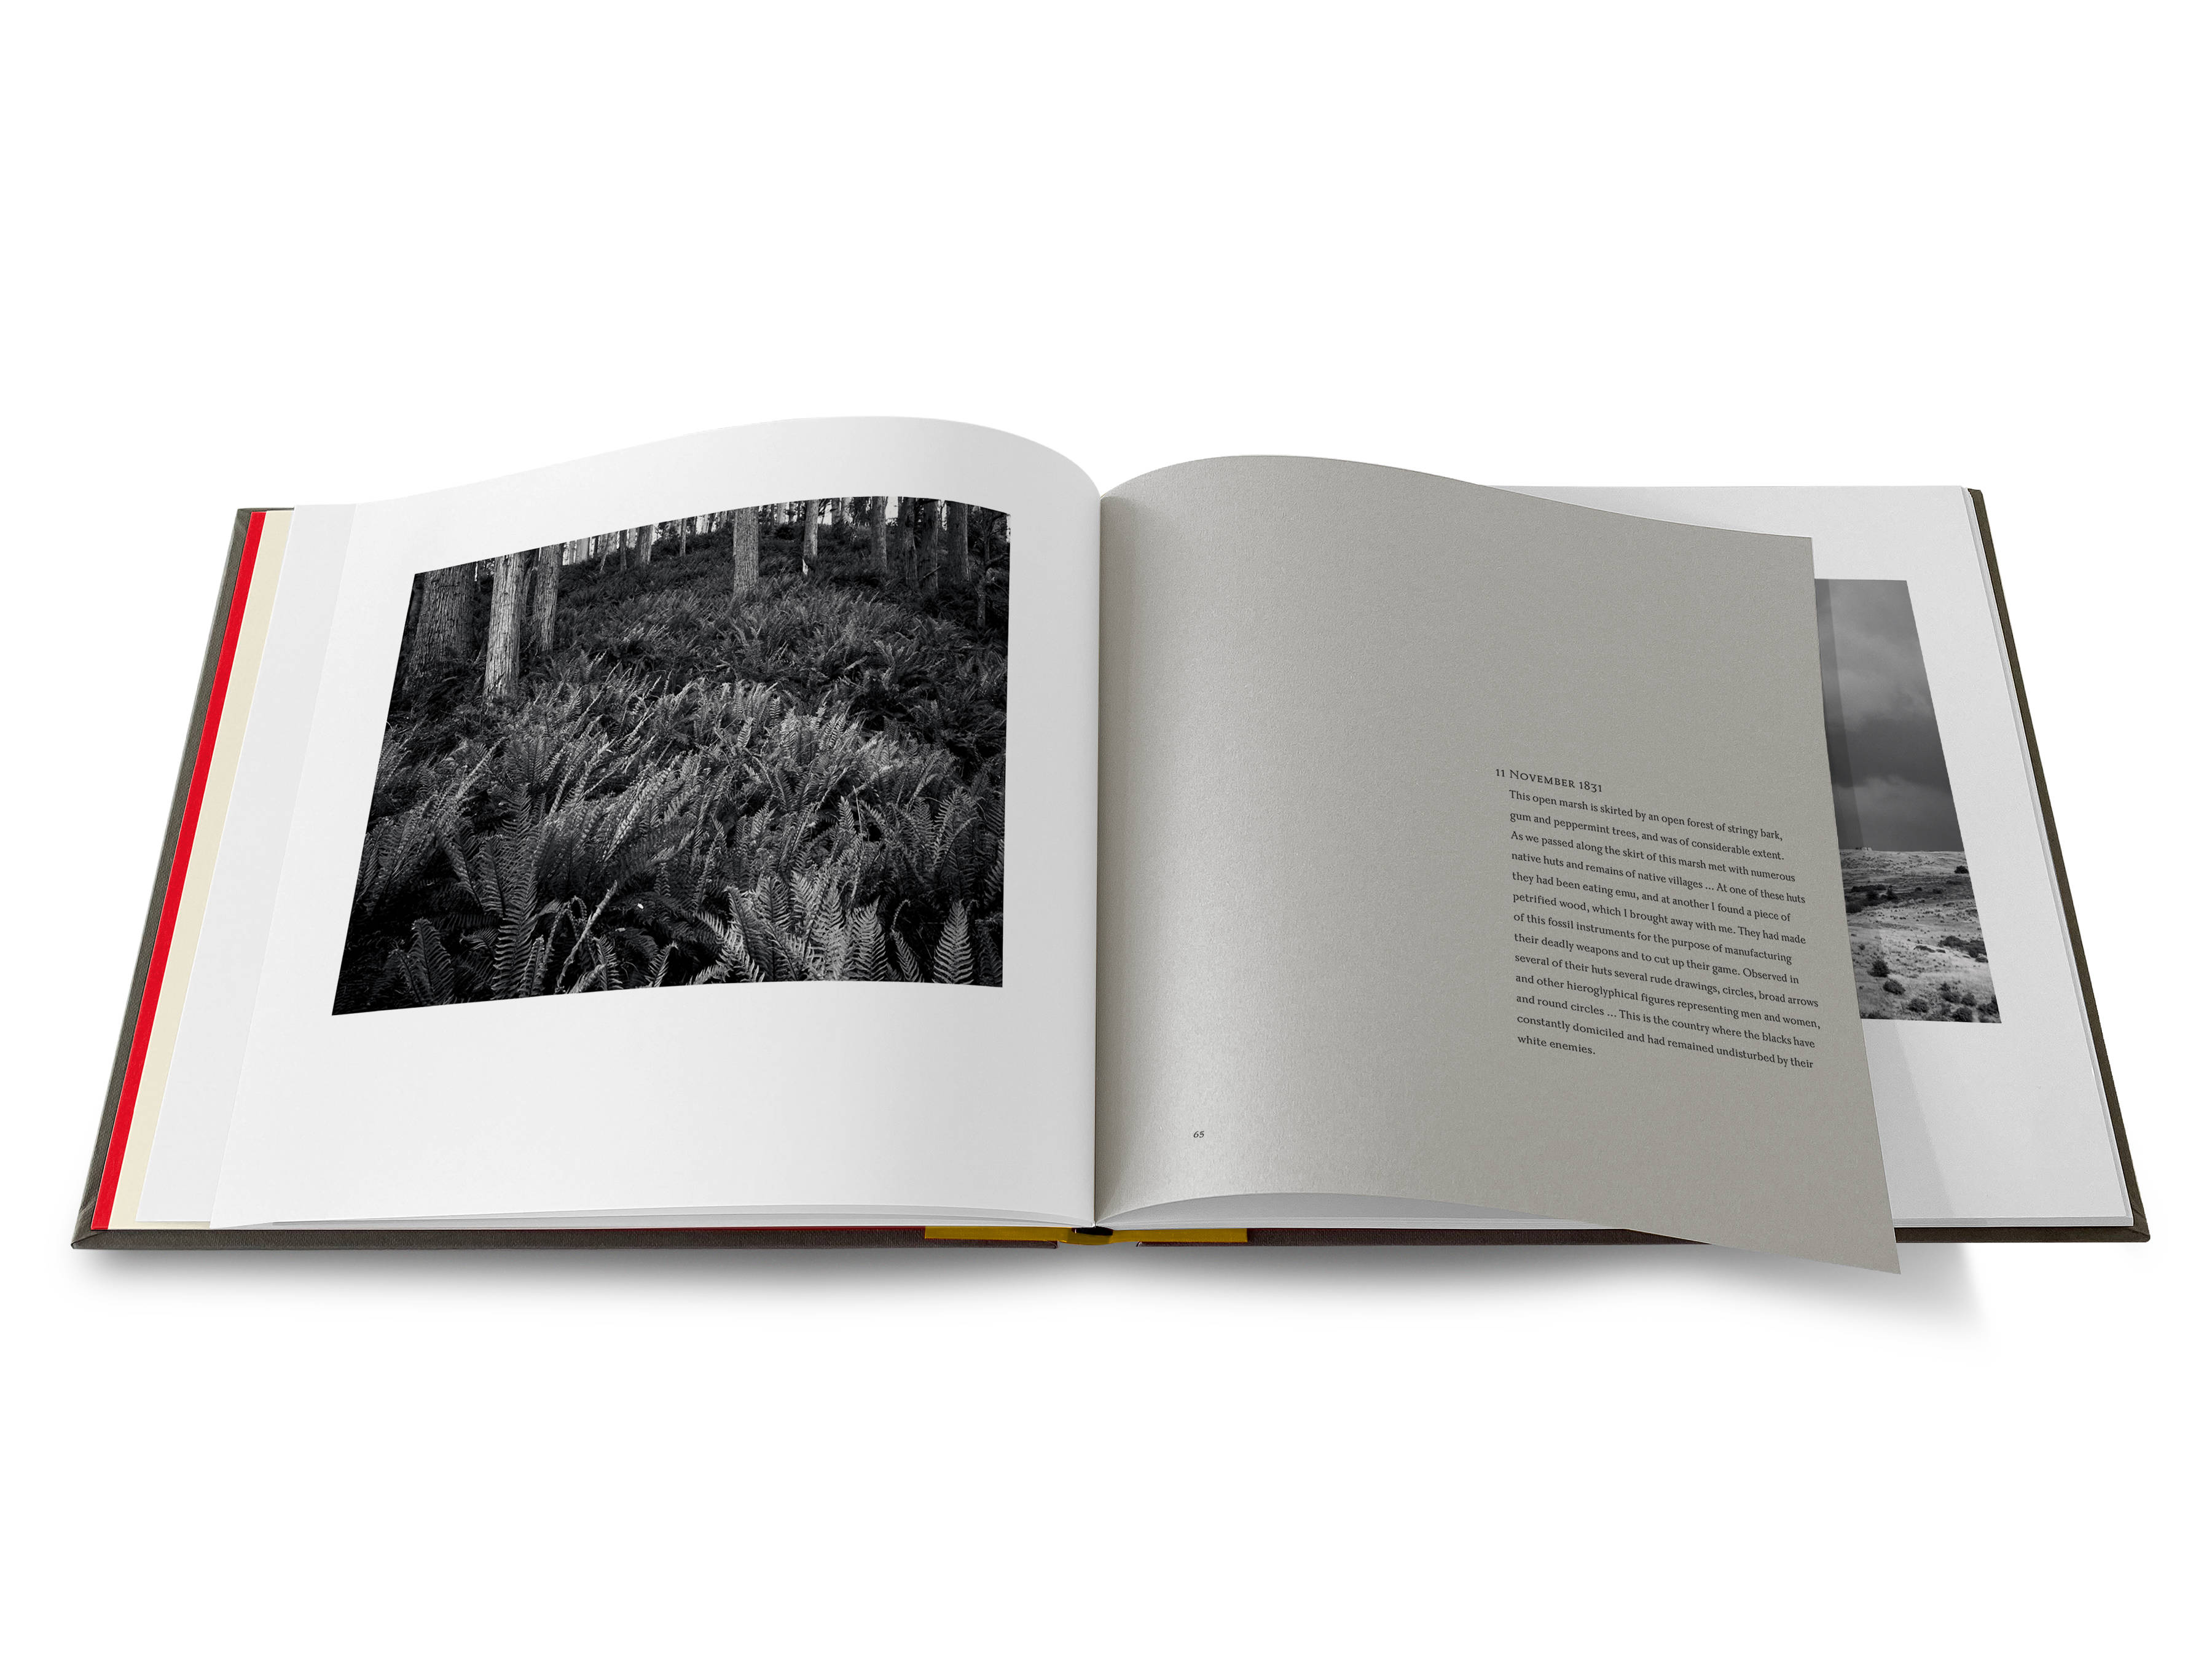 An image of a double-page spread from the Uninnocent Landscapes book with an image of a fern glade in a forest on the left and a quote from Robinson’s diary on a grey page on the right.